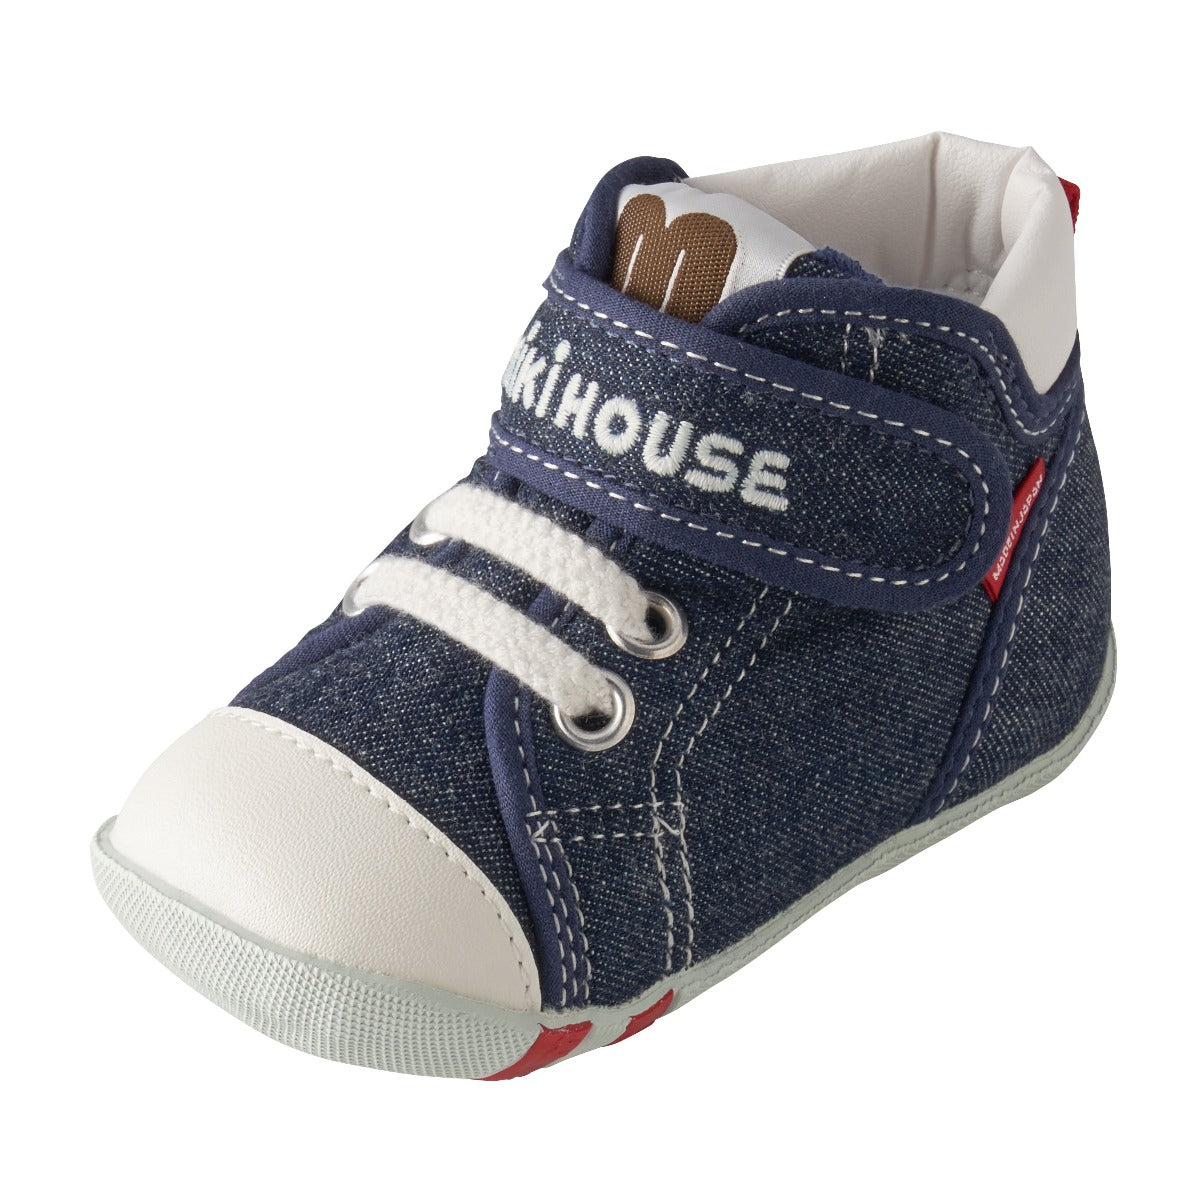 Classic High-Top “First Walker” Shoes